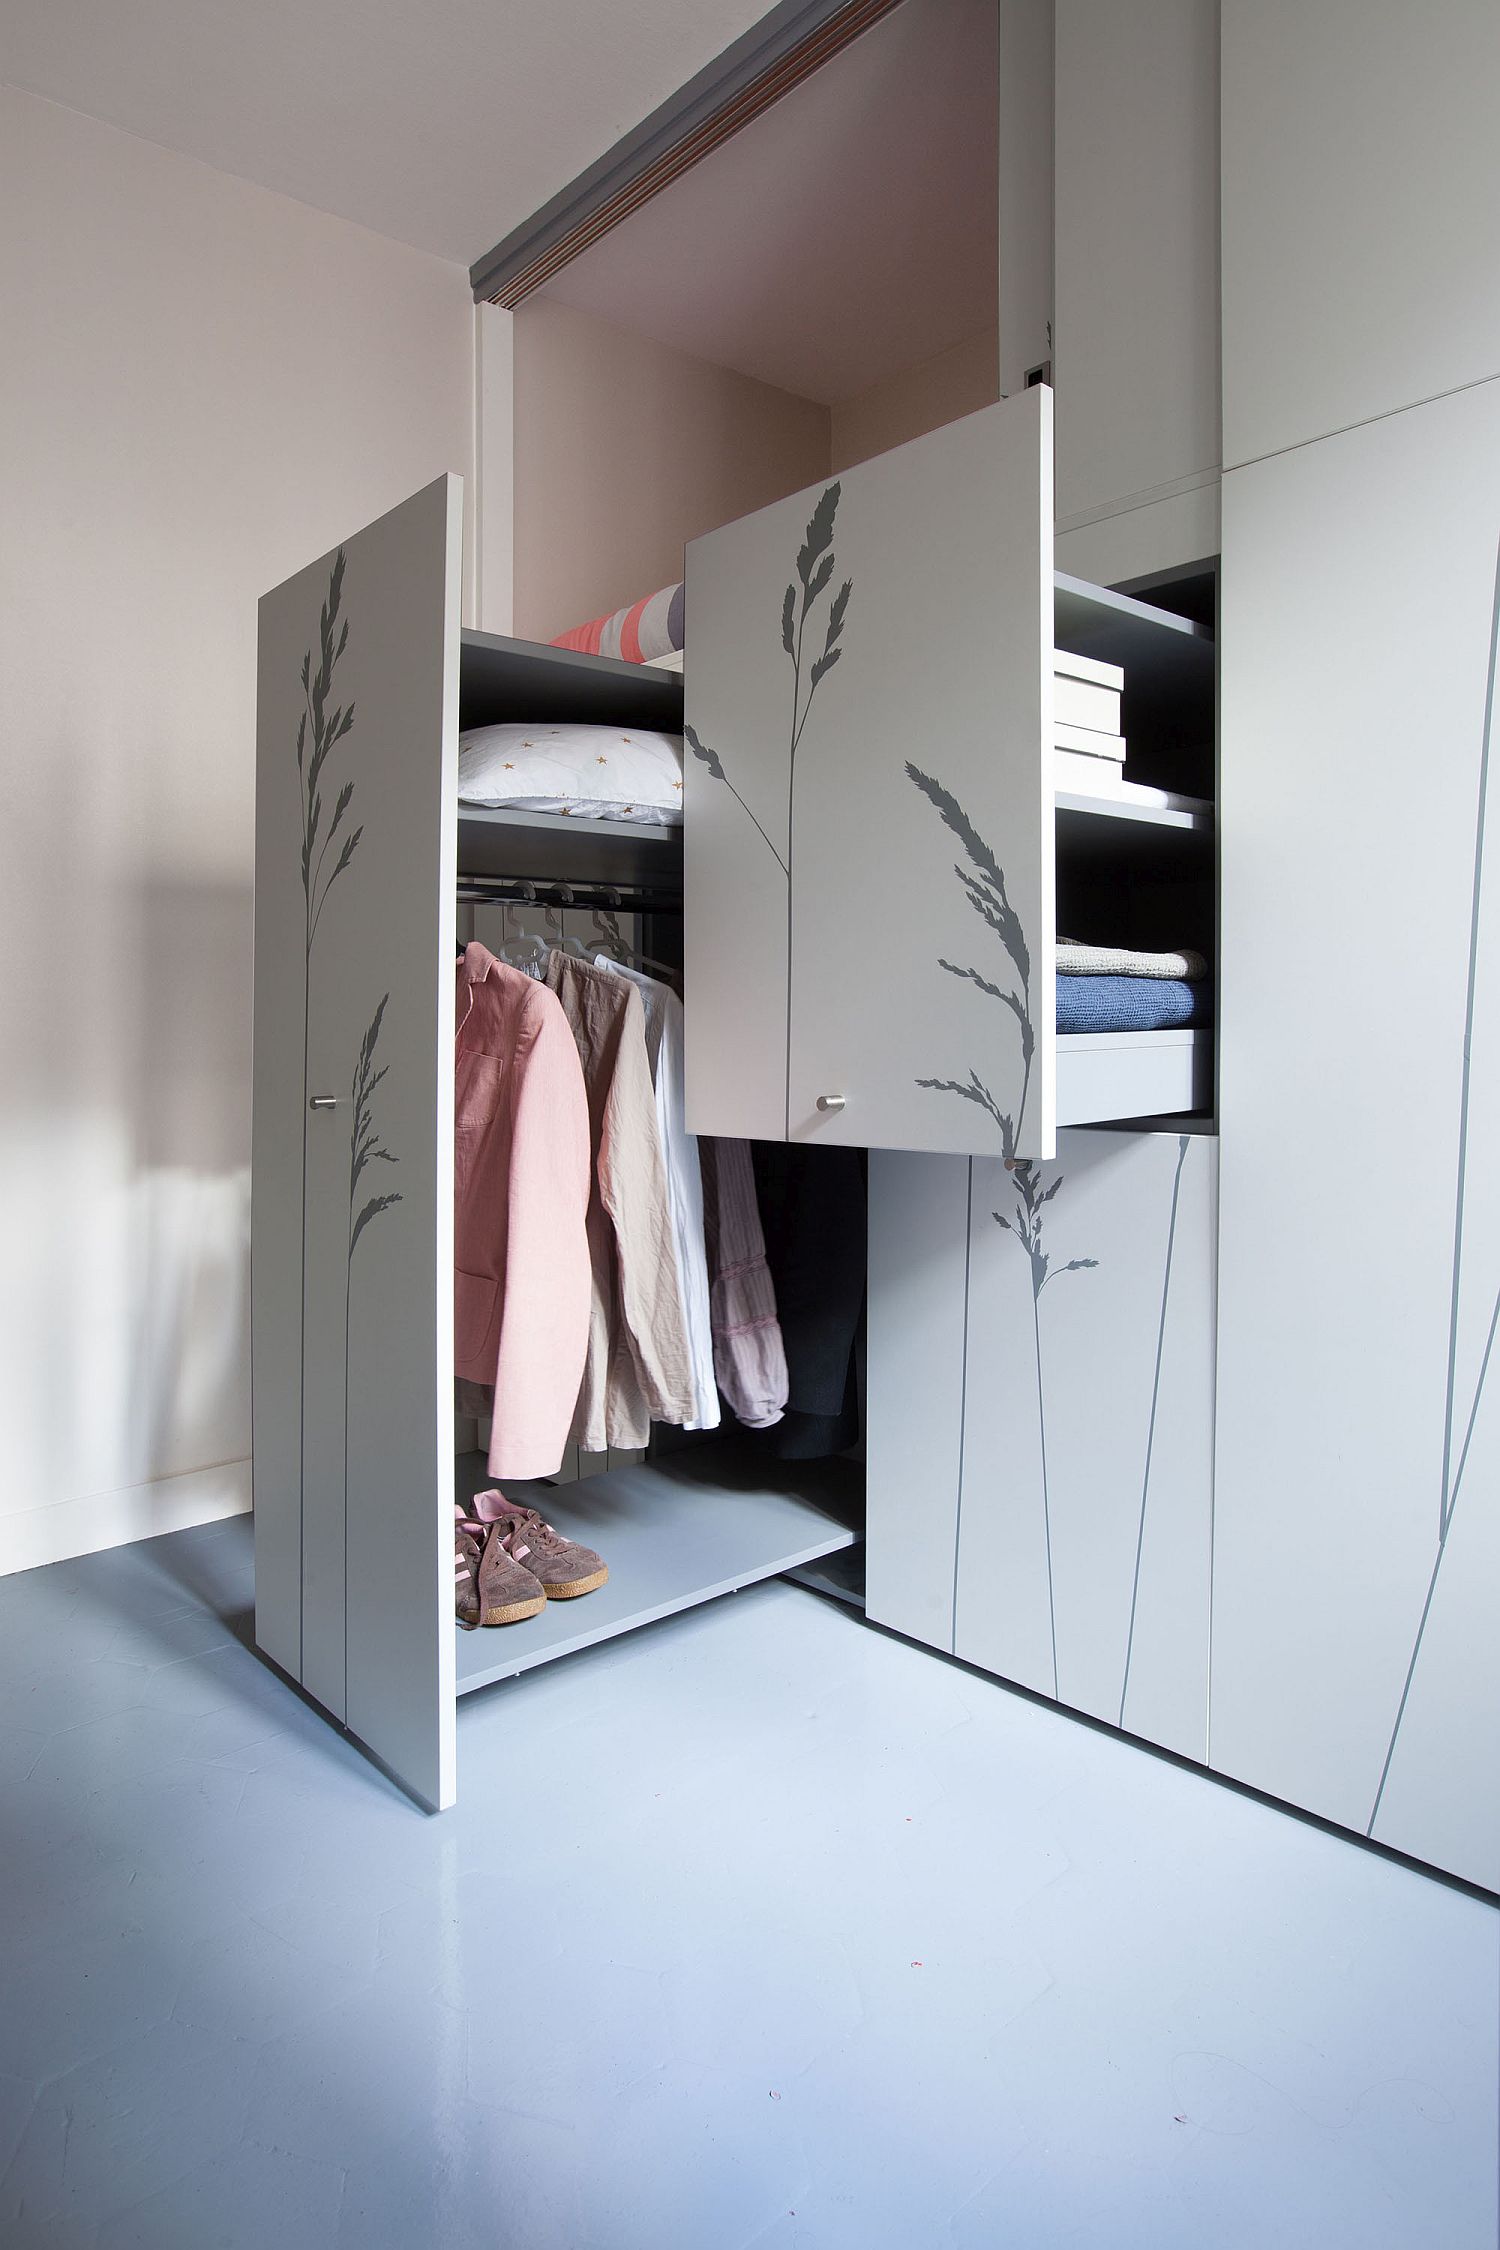 Closet allows for smart organization of wardrobe without wastage of space